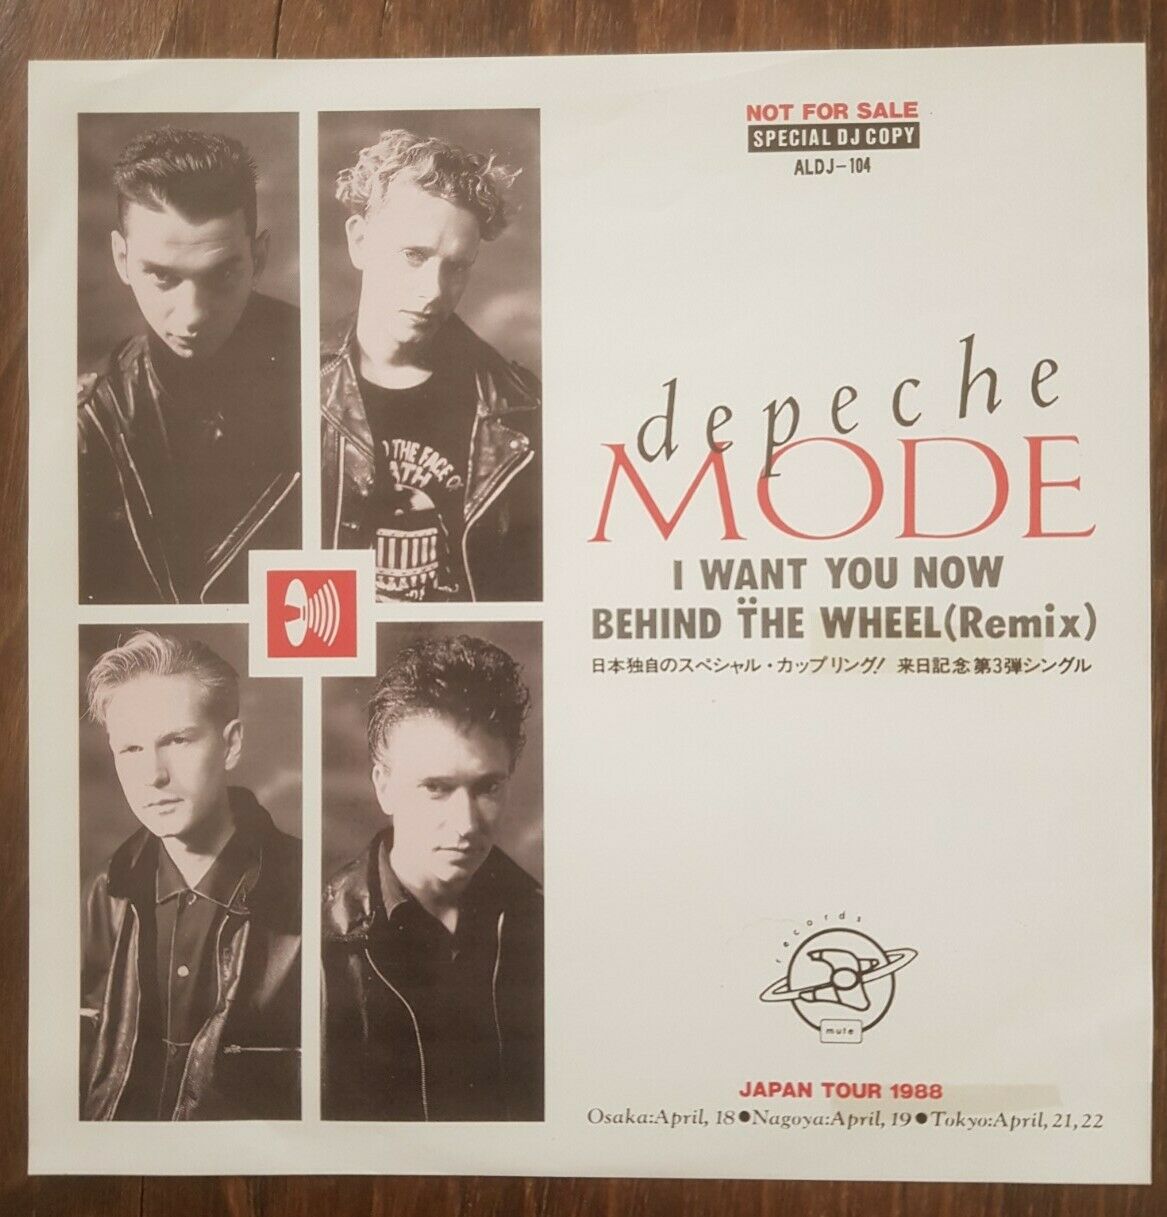  DEPECHE MODE I want you now / Behind the wheel